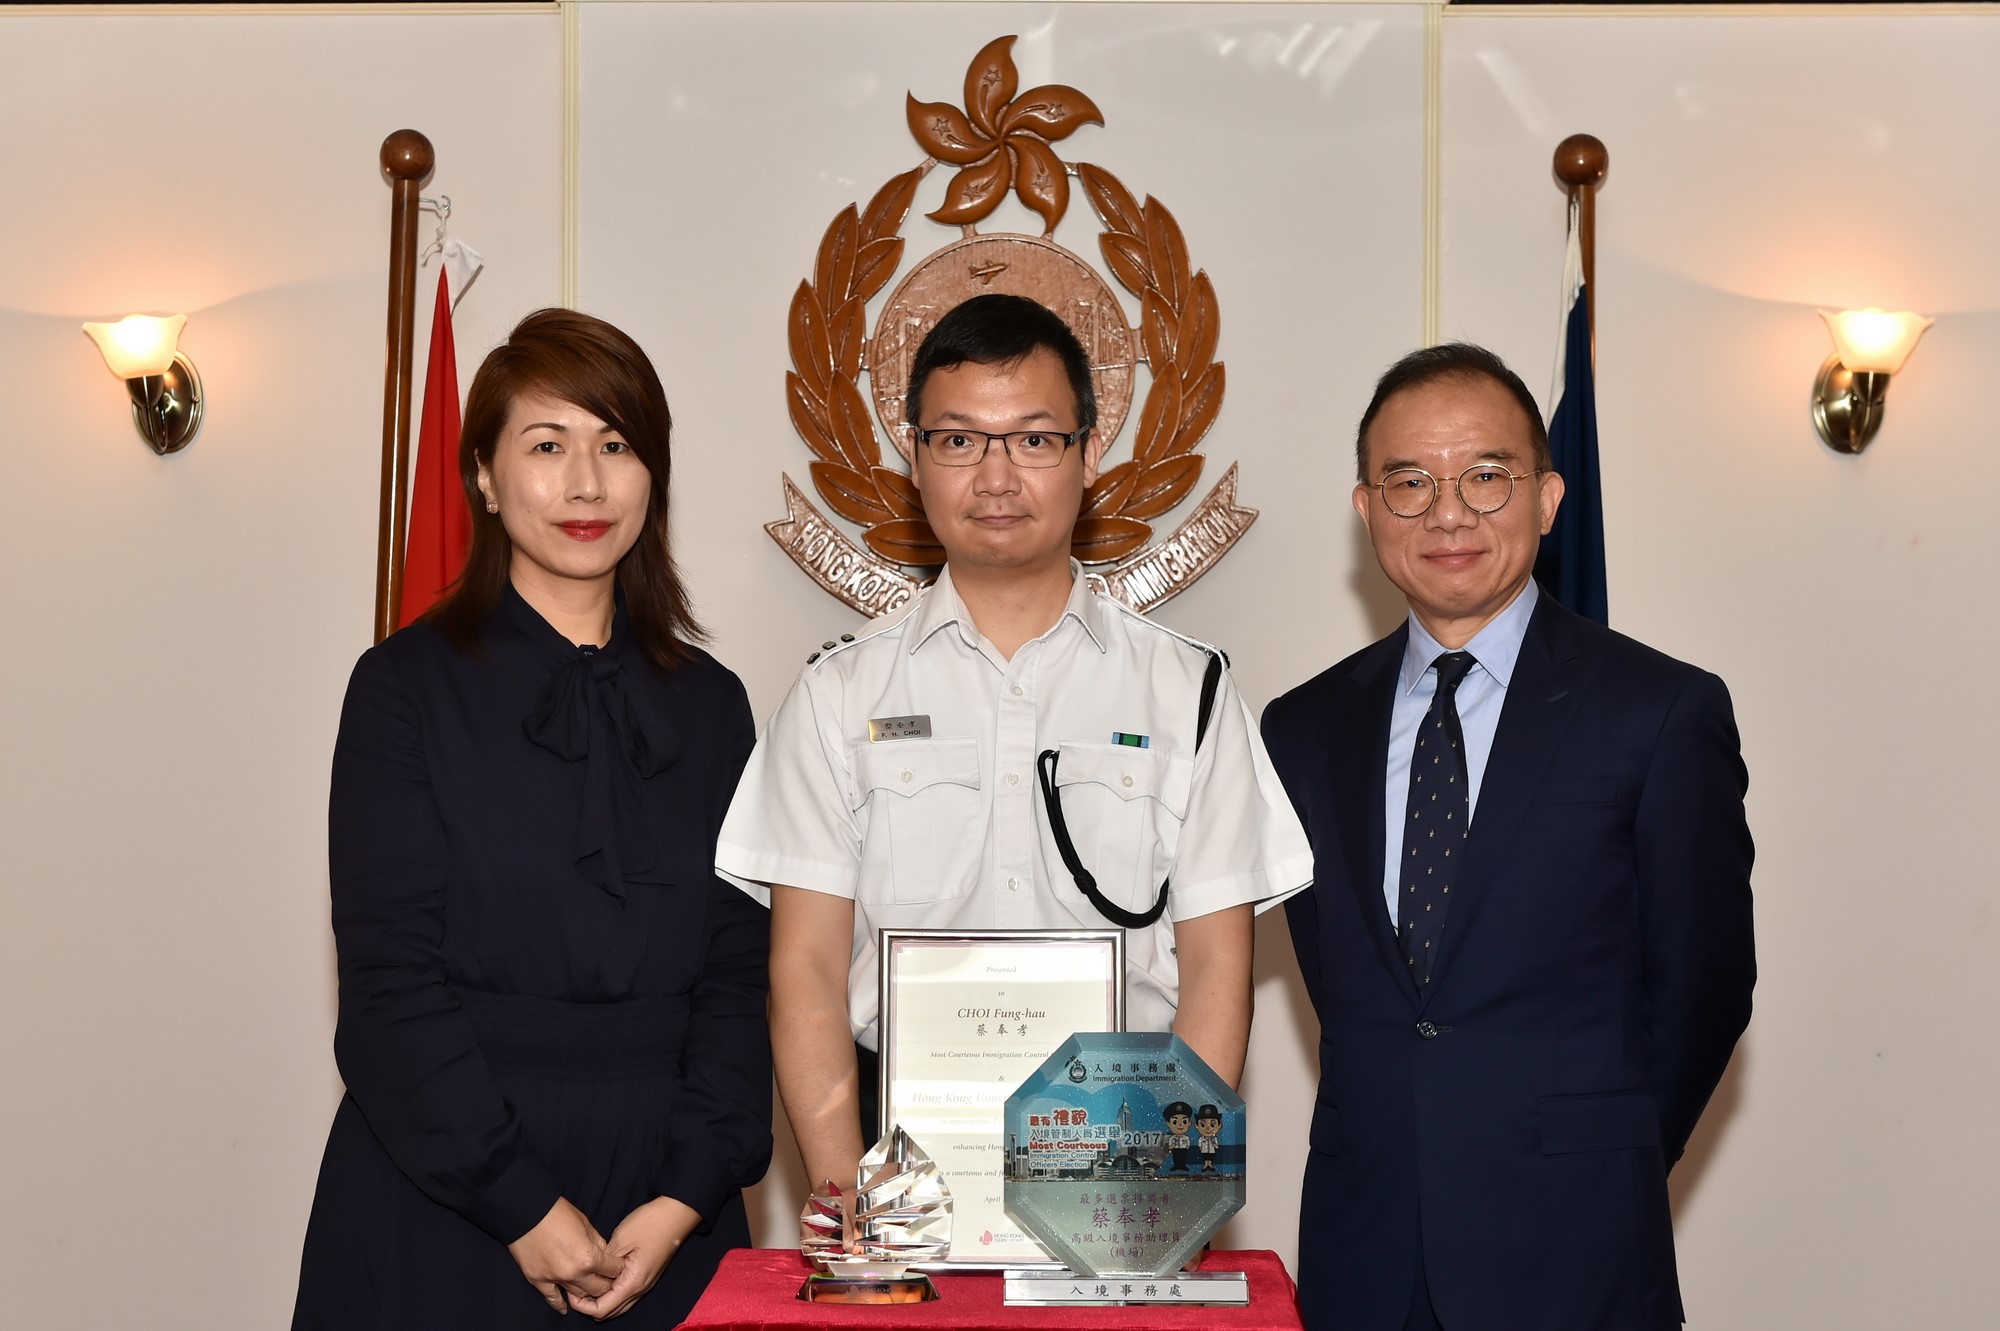 The General Manager of Corporate Affairs of the Hong Kong Tourism Board, Ms Cynthia Leung (left), and the Director of Immigration, Mr Tsang Kwok-wai (right), present awards and a souvenirs to the most courteous Immigration control officer, Mr Choi Fung-hau, today (April 24).